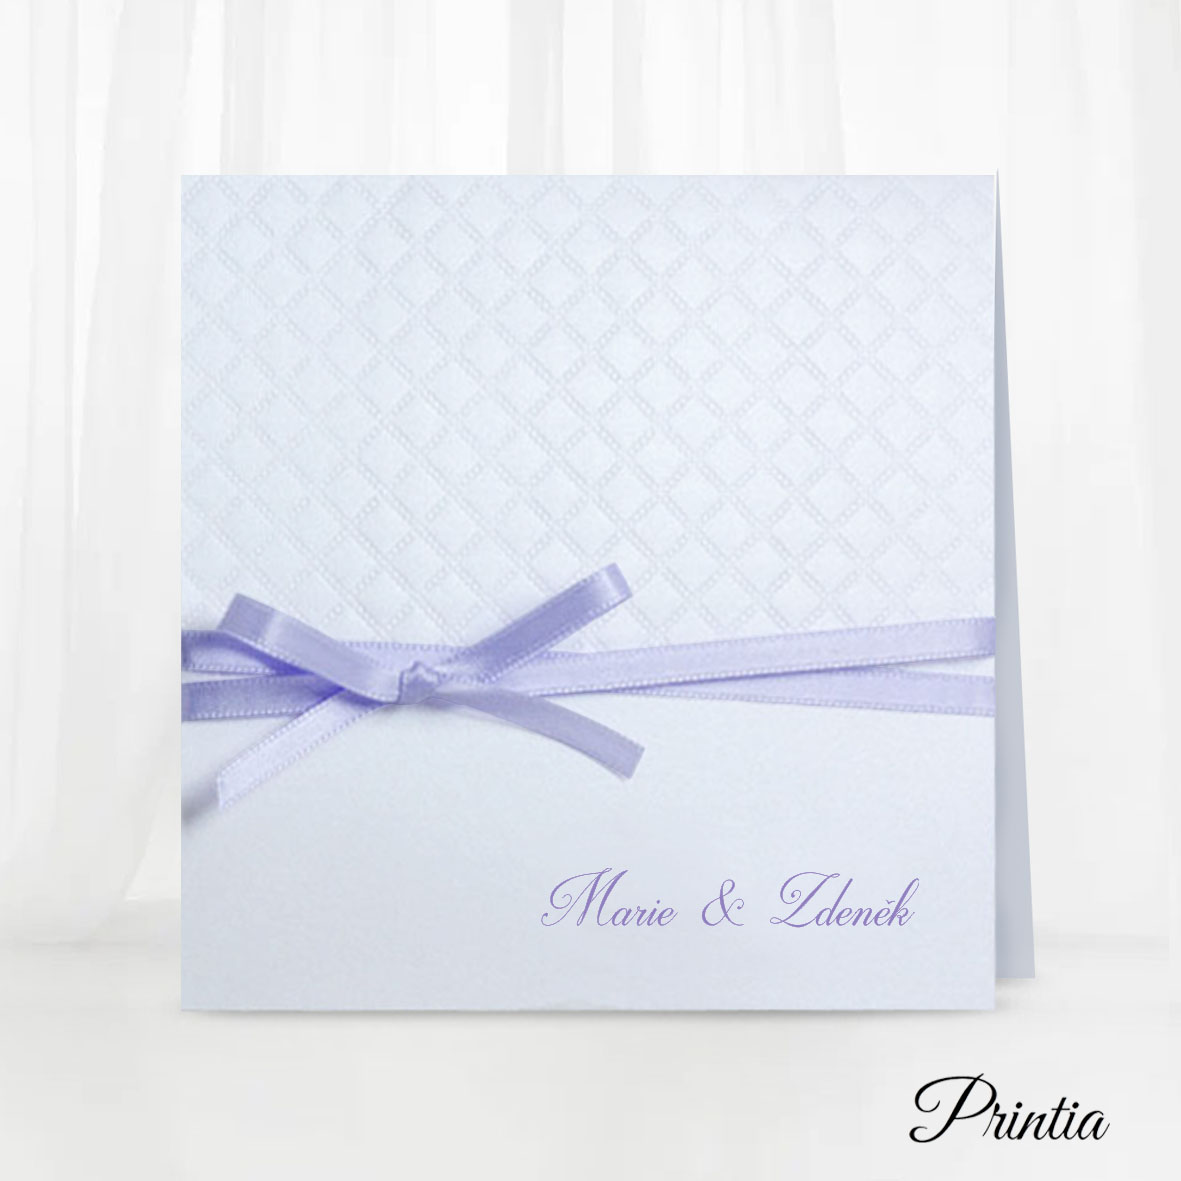 Pearl wedding invitation with a violet bow